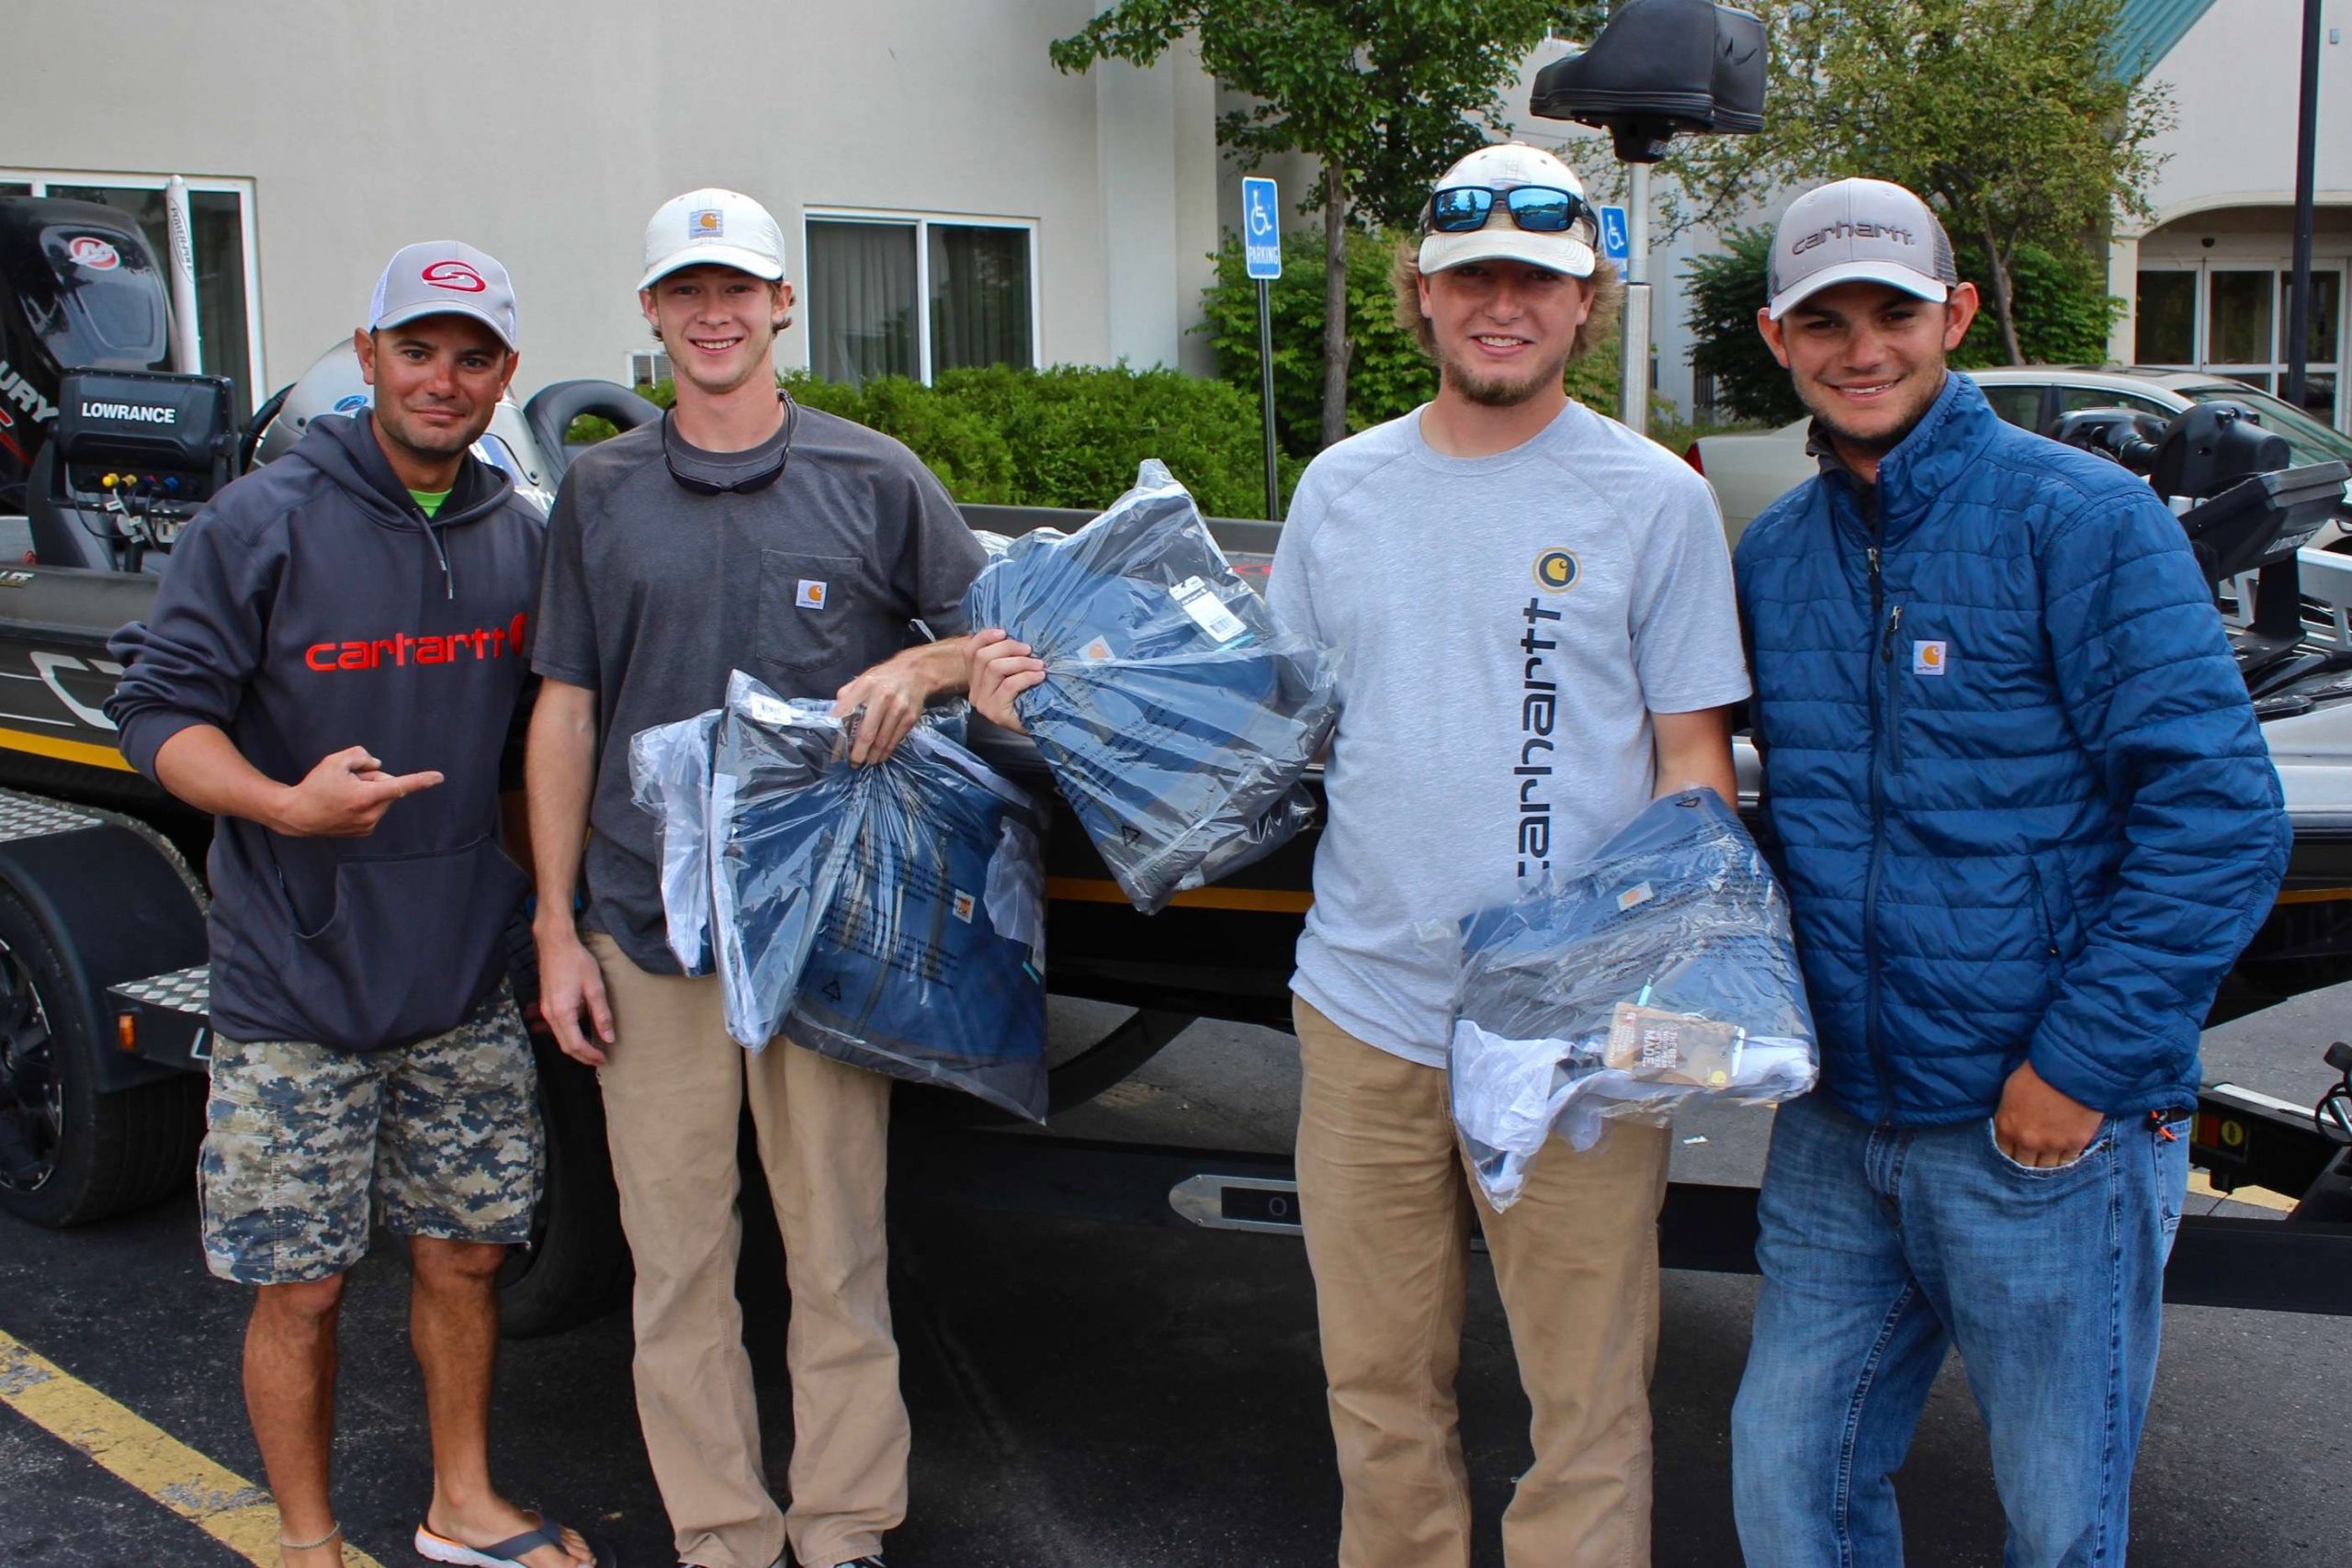 With the threat of wind and rain later in the afternoon, the college anglers were encouraged to become familiar with their new Carhartt Shoreline Angler rain suits. 
